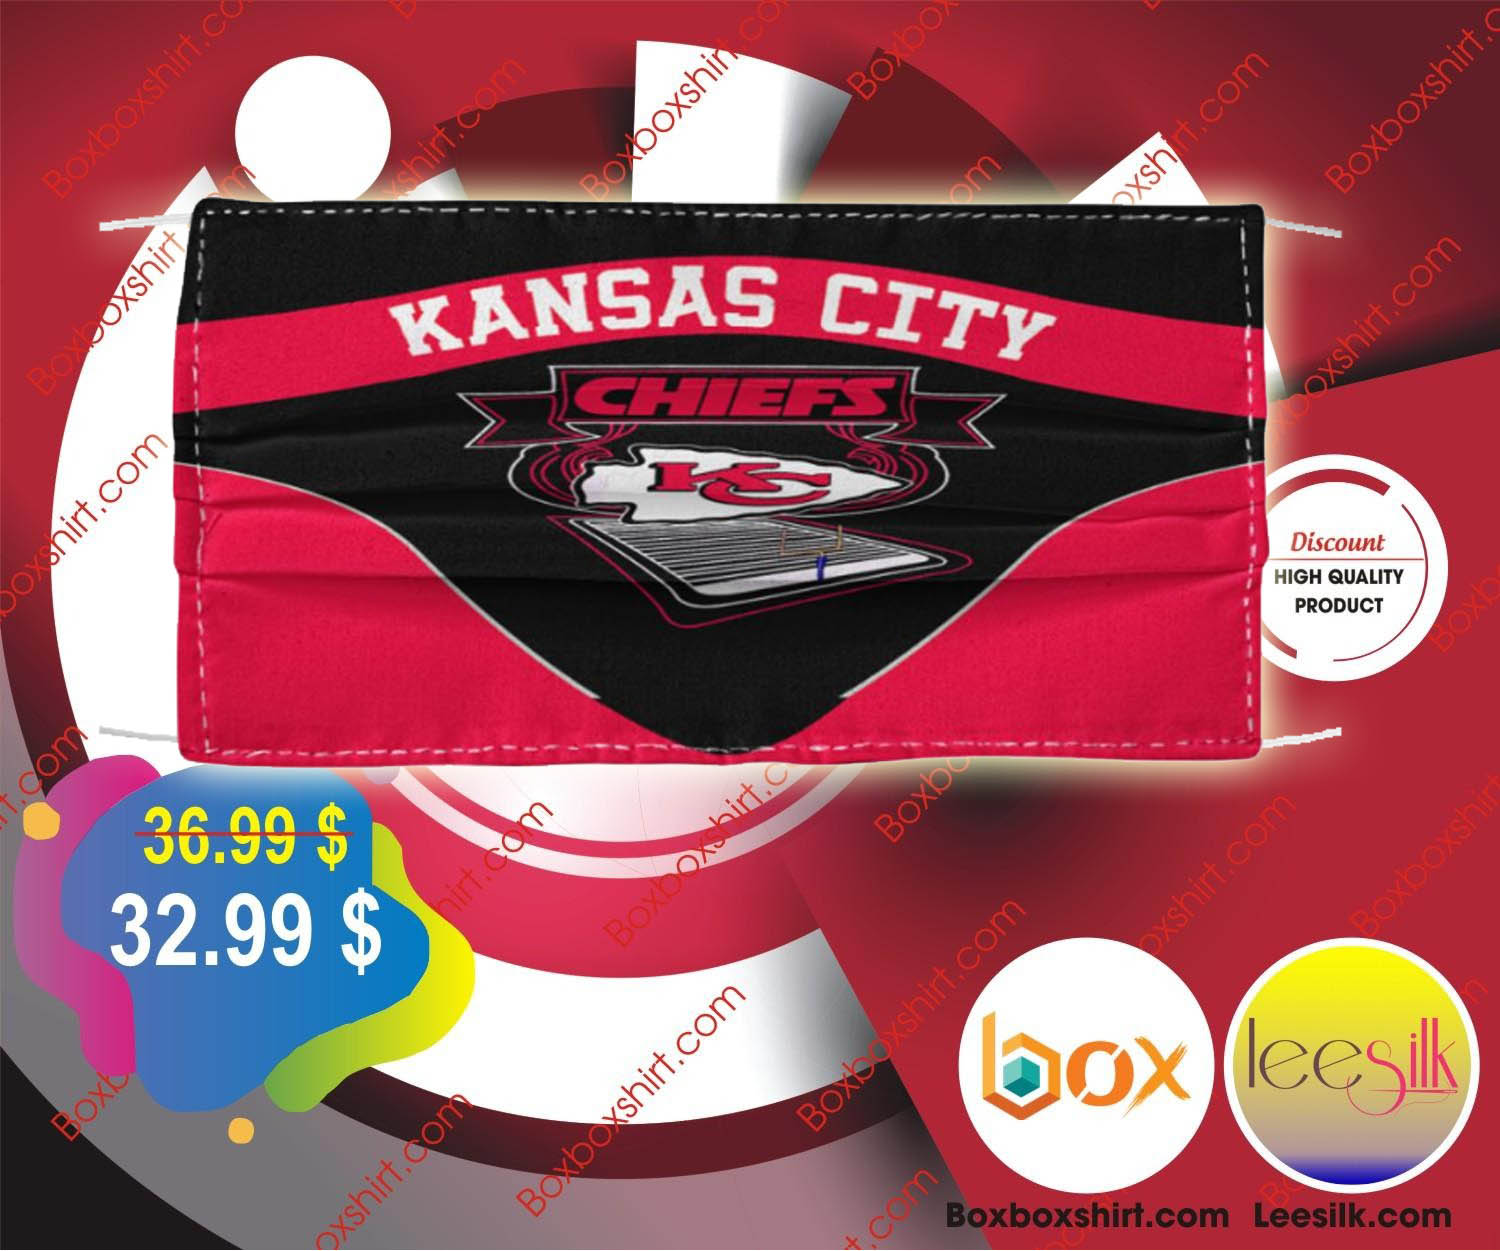 Kansas city Chief 3d face mask – LIMITED EDITION